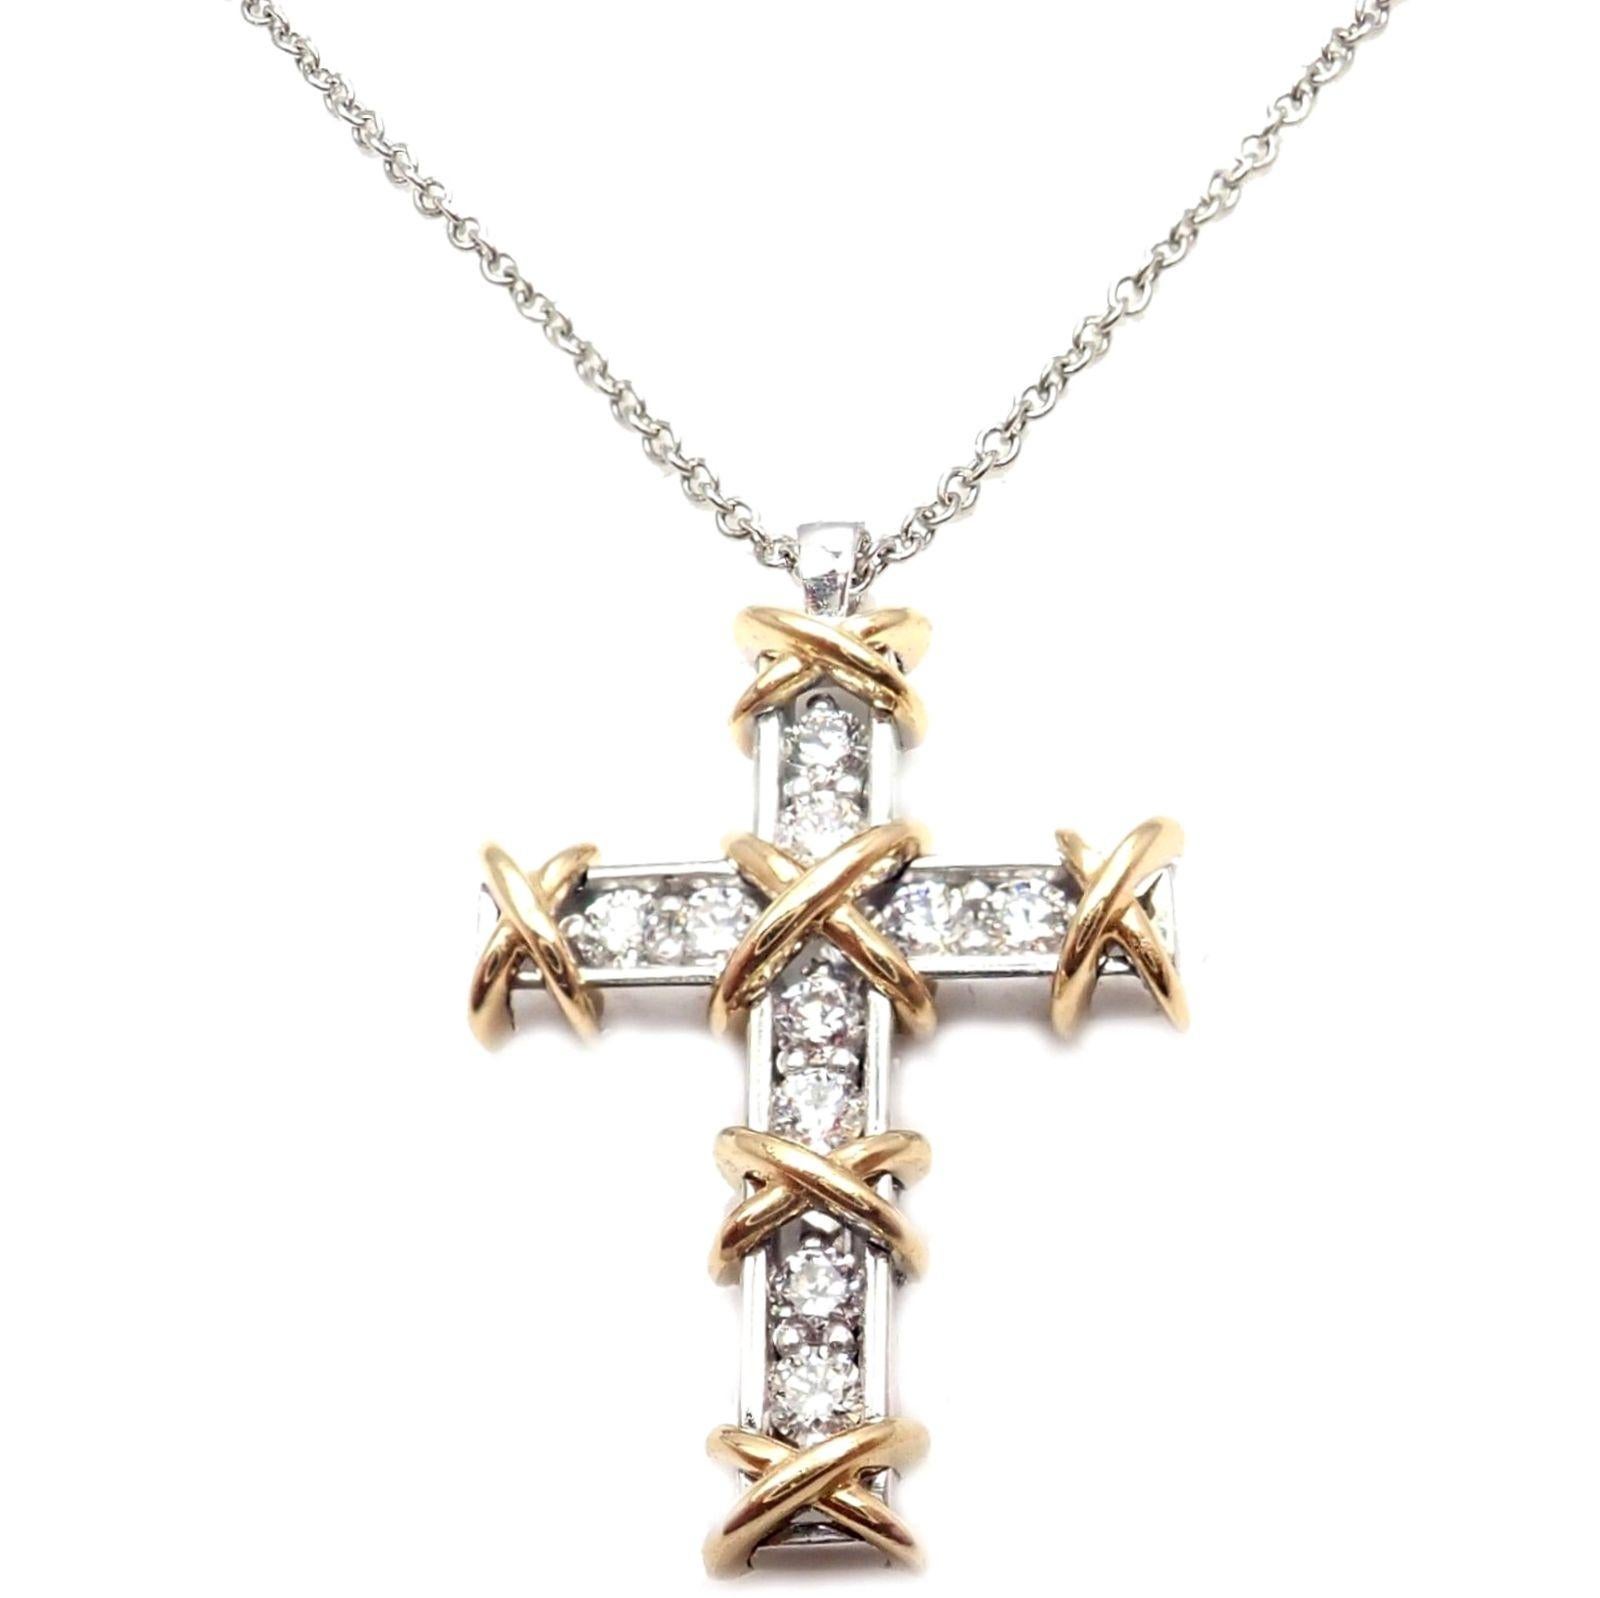 Platinum & 18k Yellow Gold Diamond Cross Pendant Necklace by Jean Schlumberger for Tiffany & Co. 
With 10 round brilliant cut diamonds VVS1 clarity, G color total weight approx. .35ct
Details: 
Length: 18.5